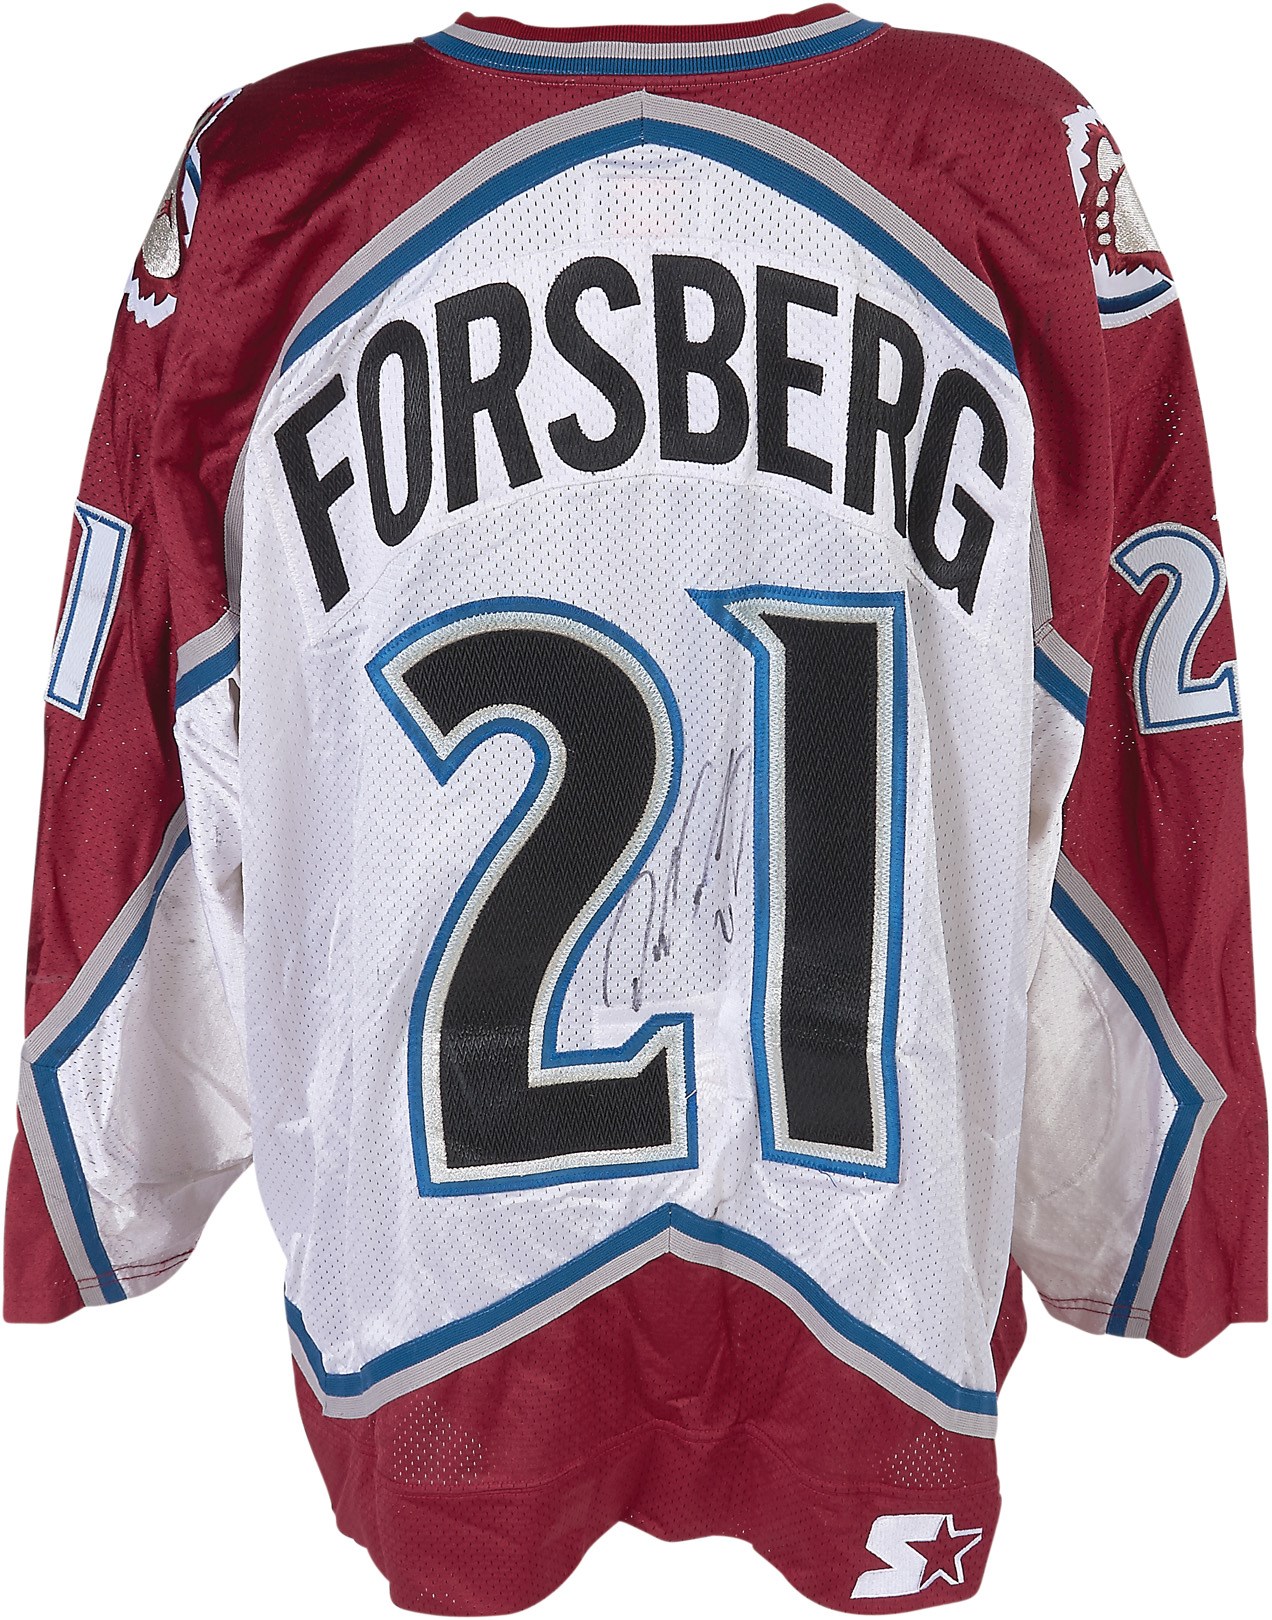 - 1998-99 Peter Forsberg Colorado Avalanche Game Worn Jersey (Photo-Matched, MeiGray)